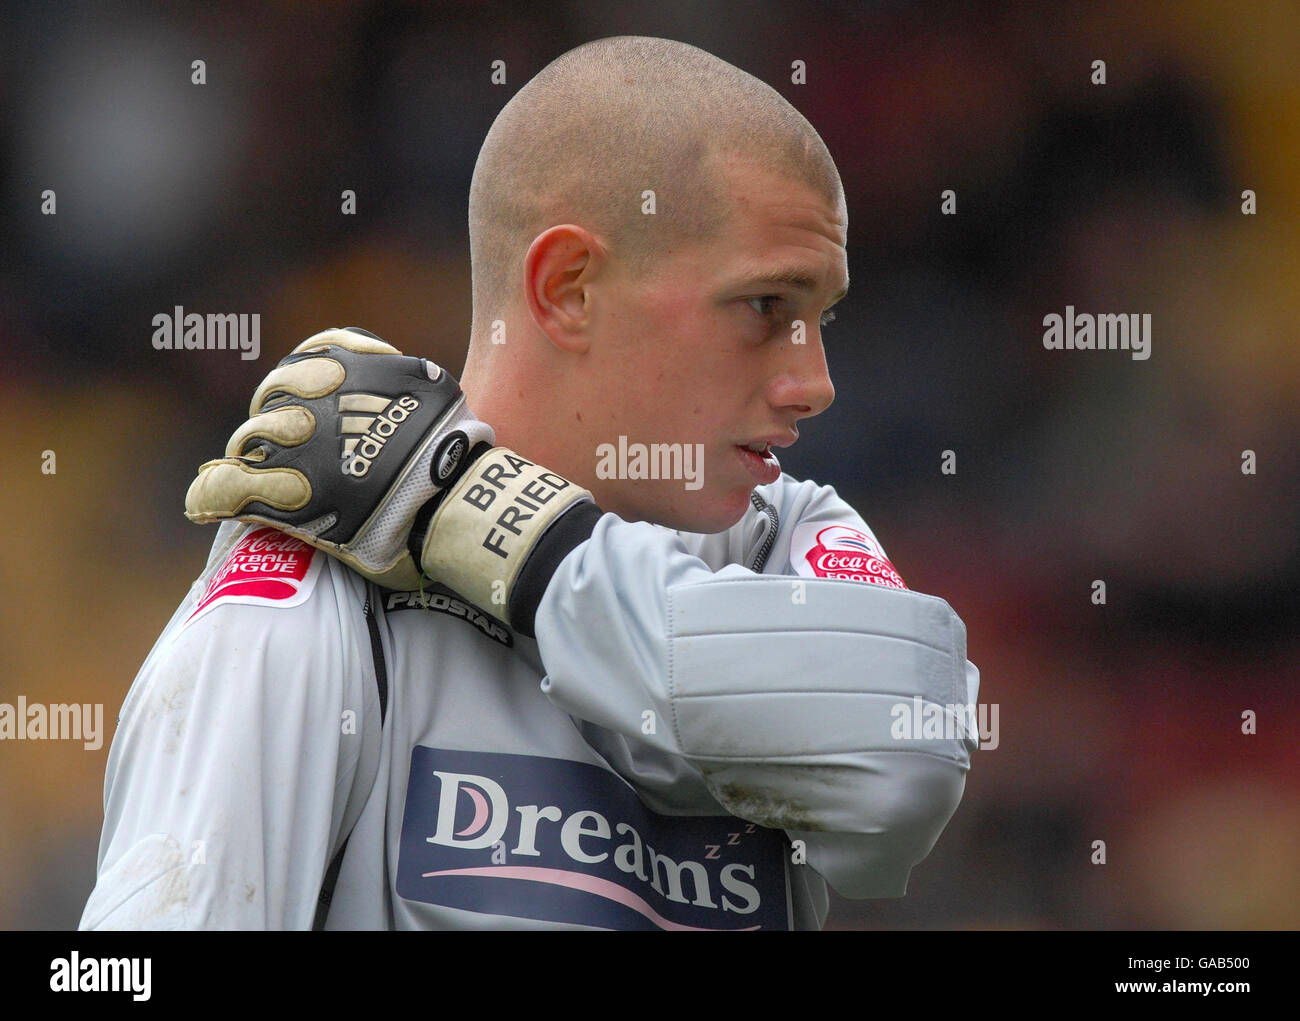 Wycombe's keeper Frank Fielding during the Coca-Cola Football League Two match at Valley Parade Stadium, Bradford. Stock Photo